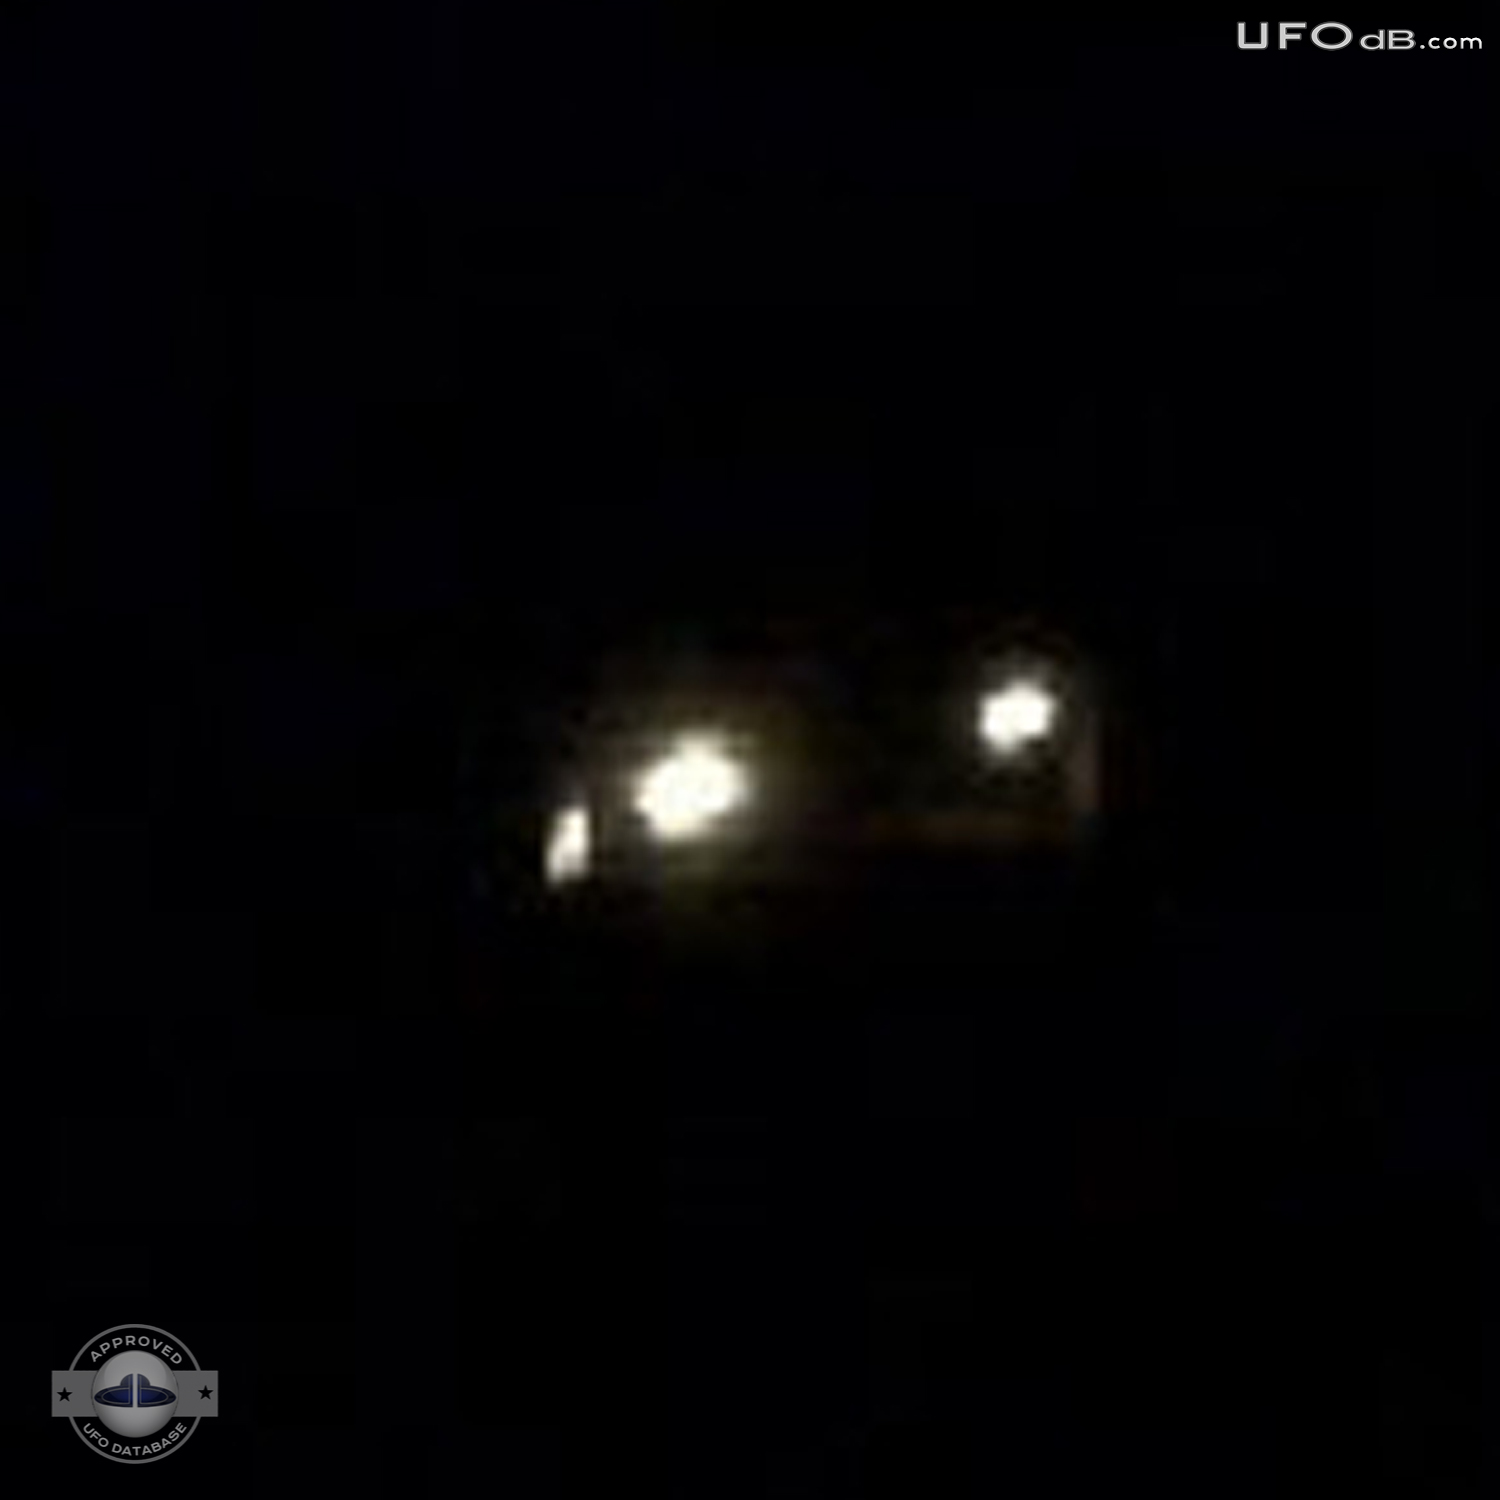 Uncle in Australia post a UFO picture for Nephew in UK | February 2011 UFO Picture #284-3